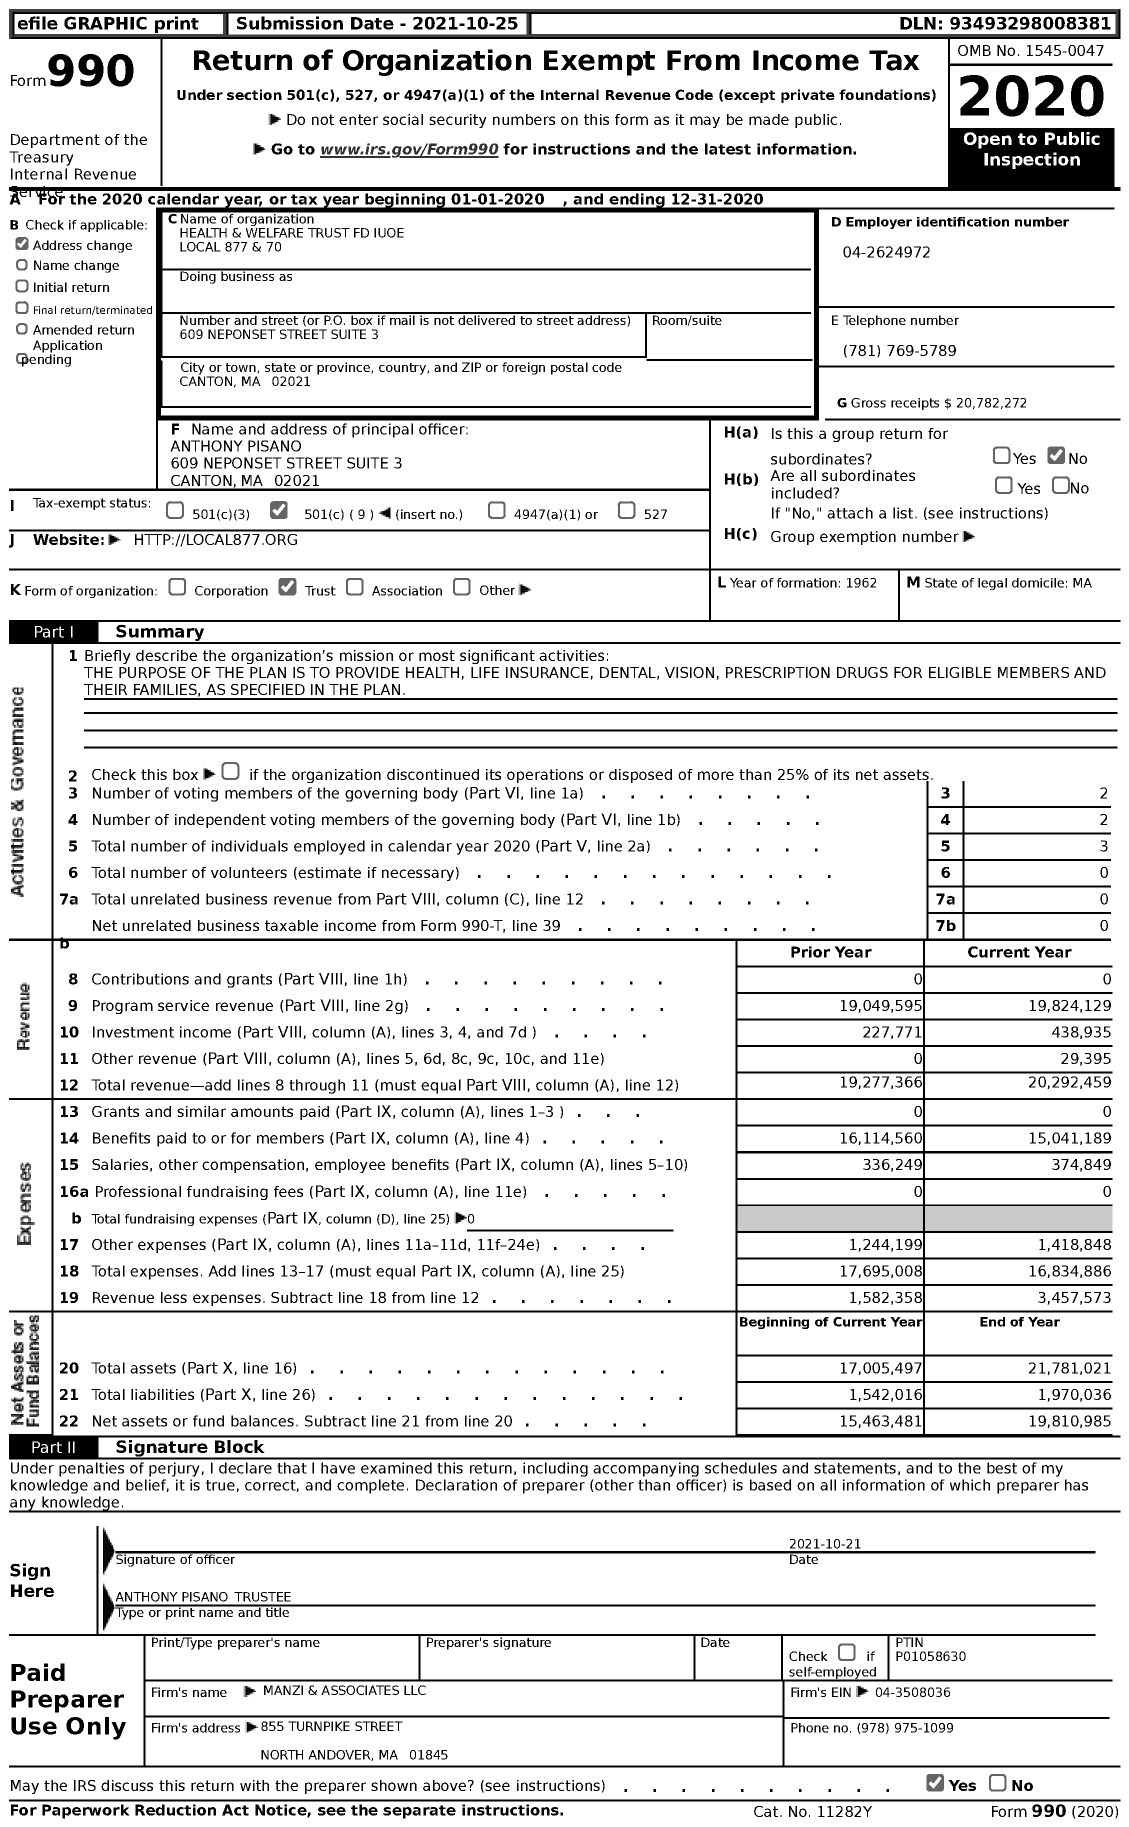 Image of first page of 2020 Form 990 for Health and Welfare Trust Fund Iuoe Local 877 and 70